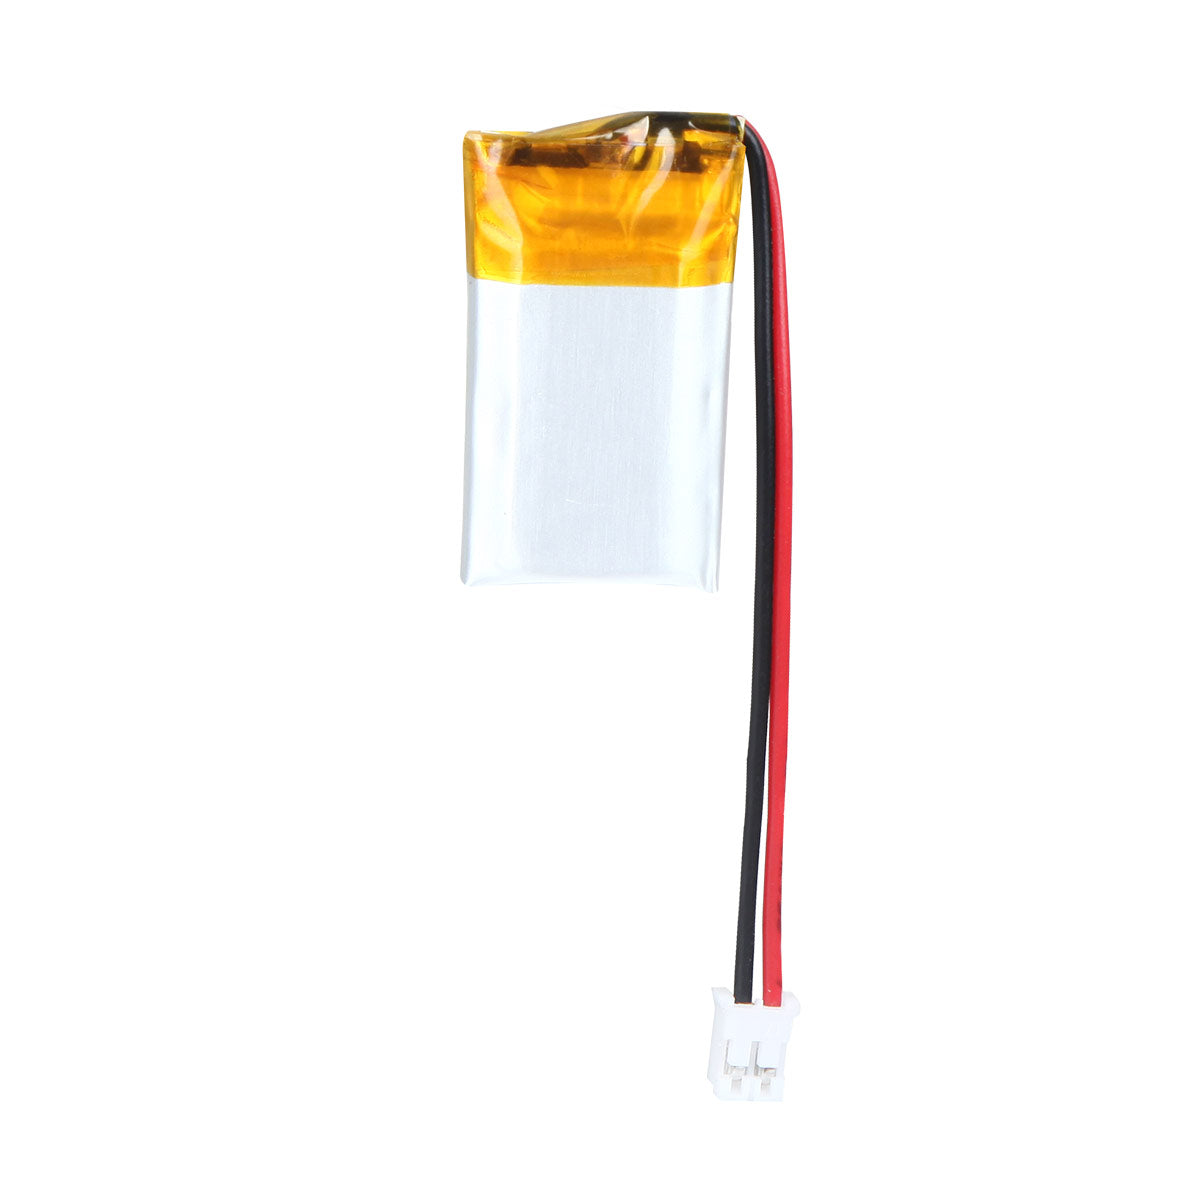 YDL 3.7V 170mAh 651723 Rechargeable Lithium Polymer Battery Length 25mm